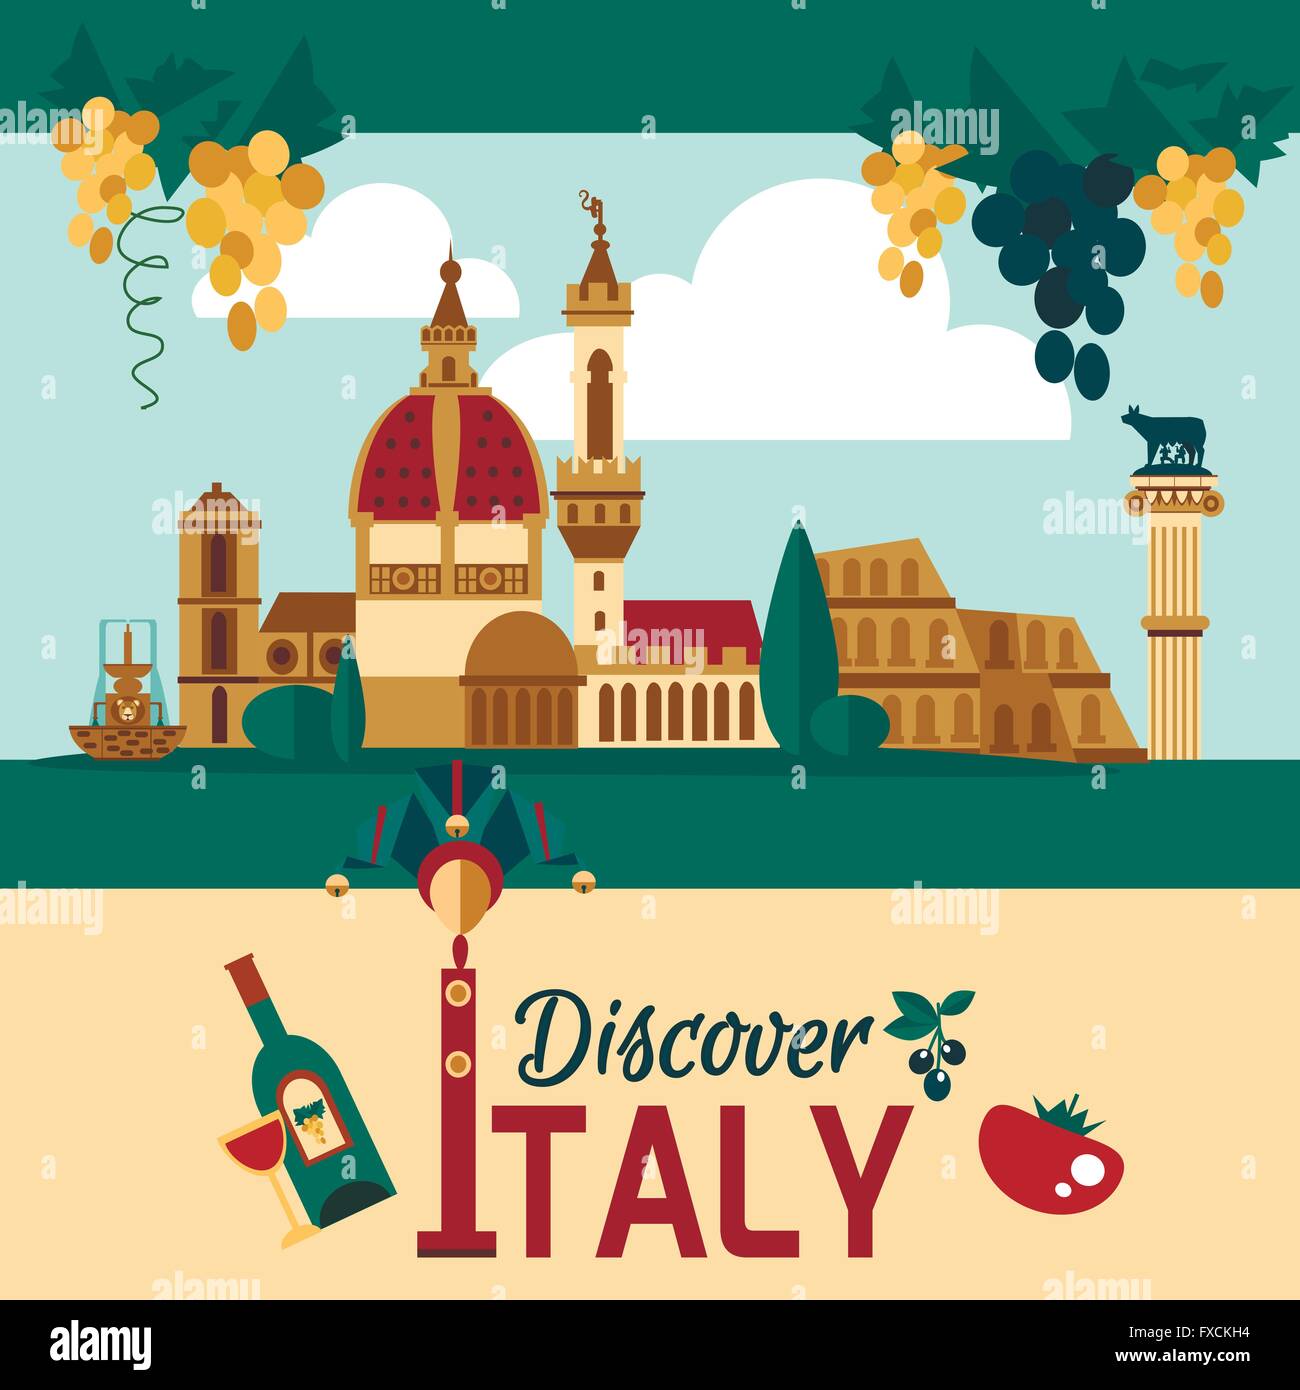 Italy Touristic Poster Stock Vector